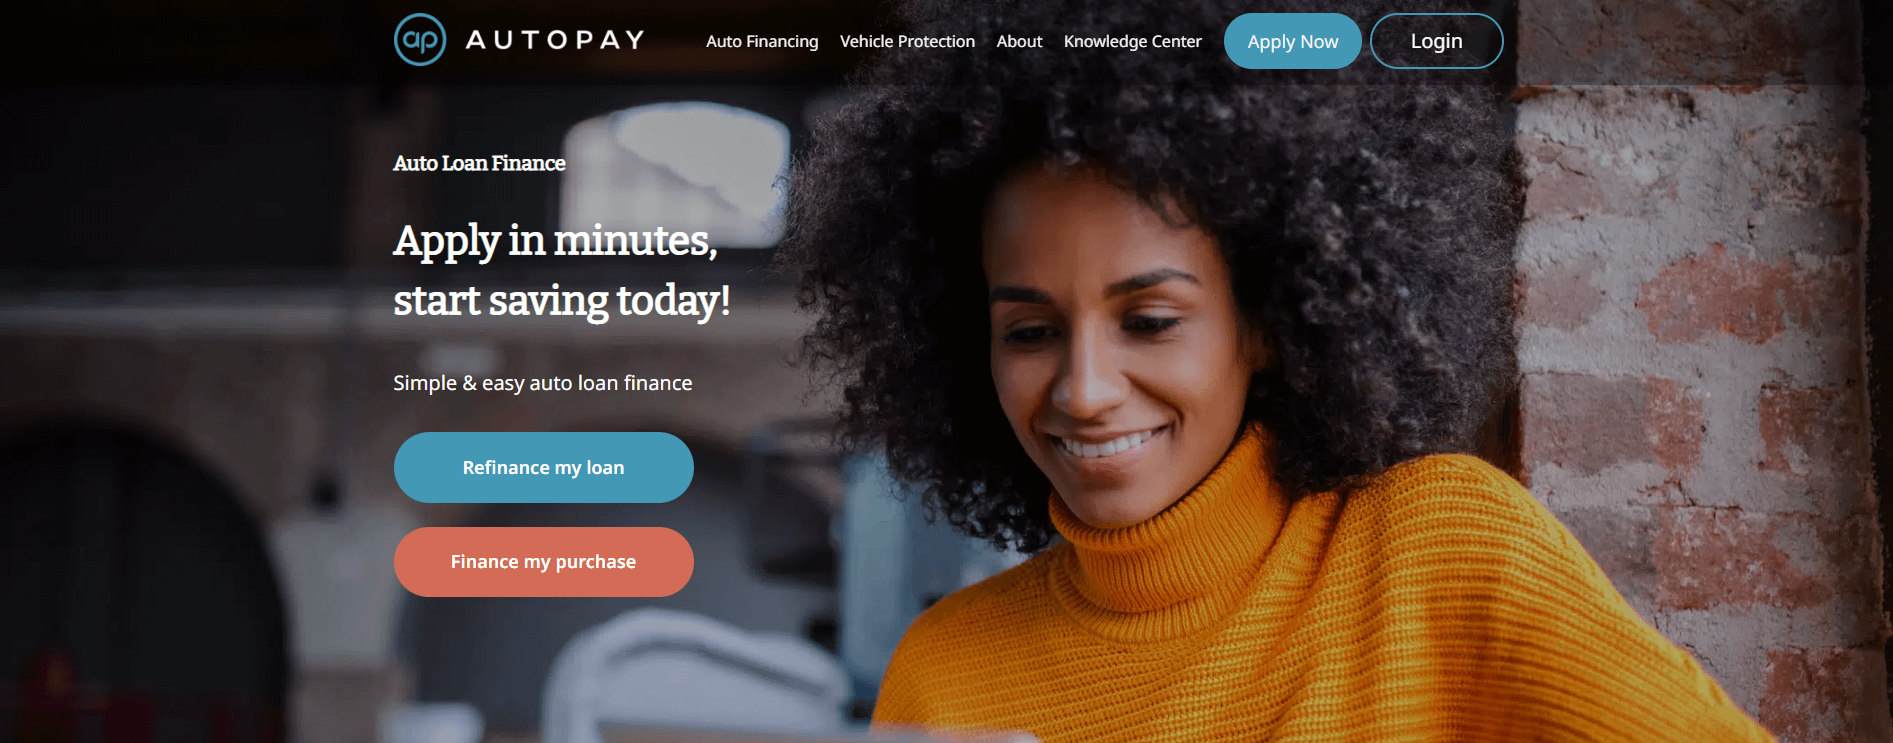 Autopay homepage